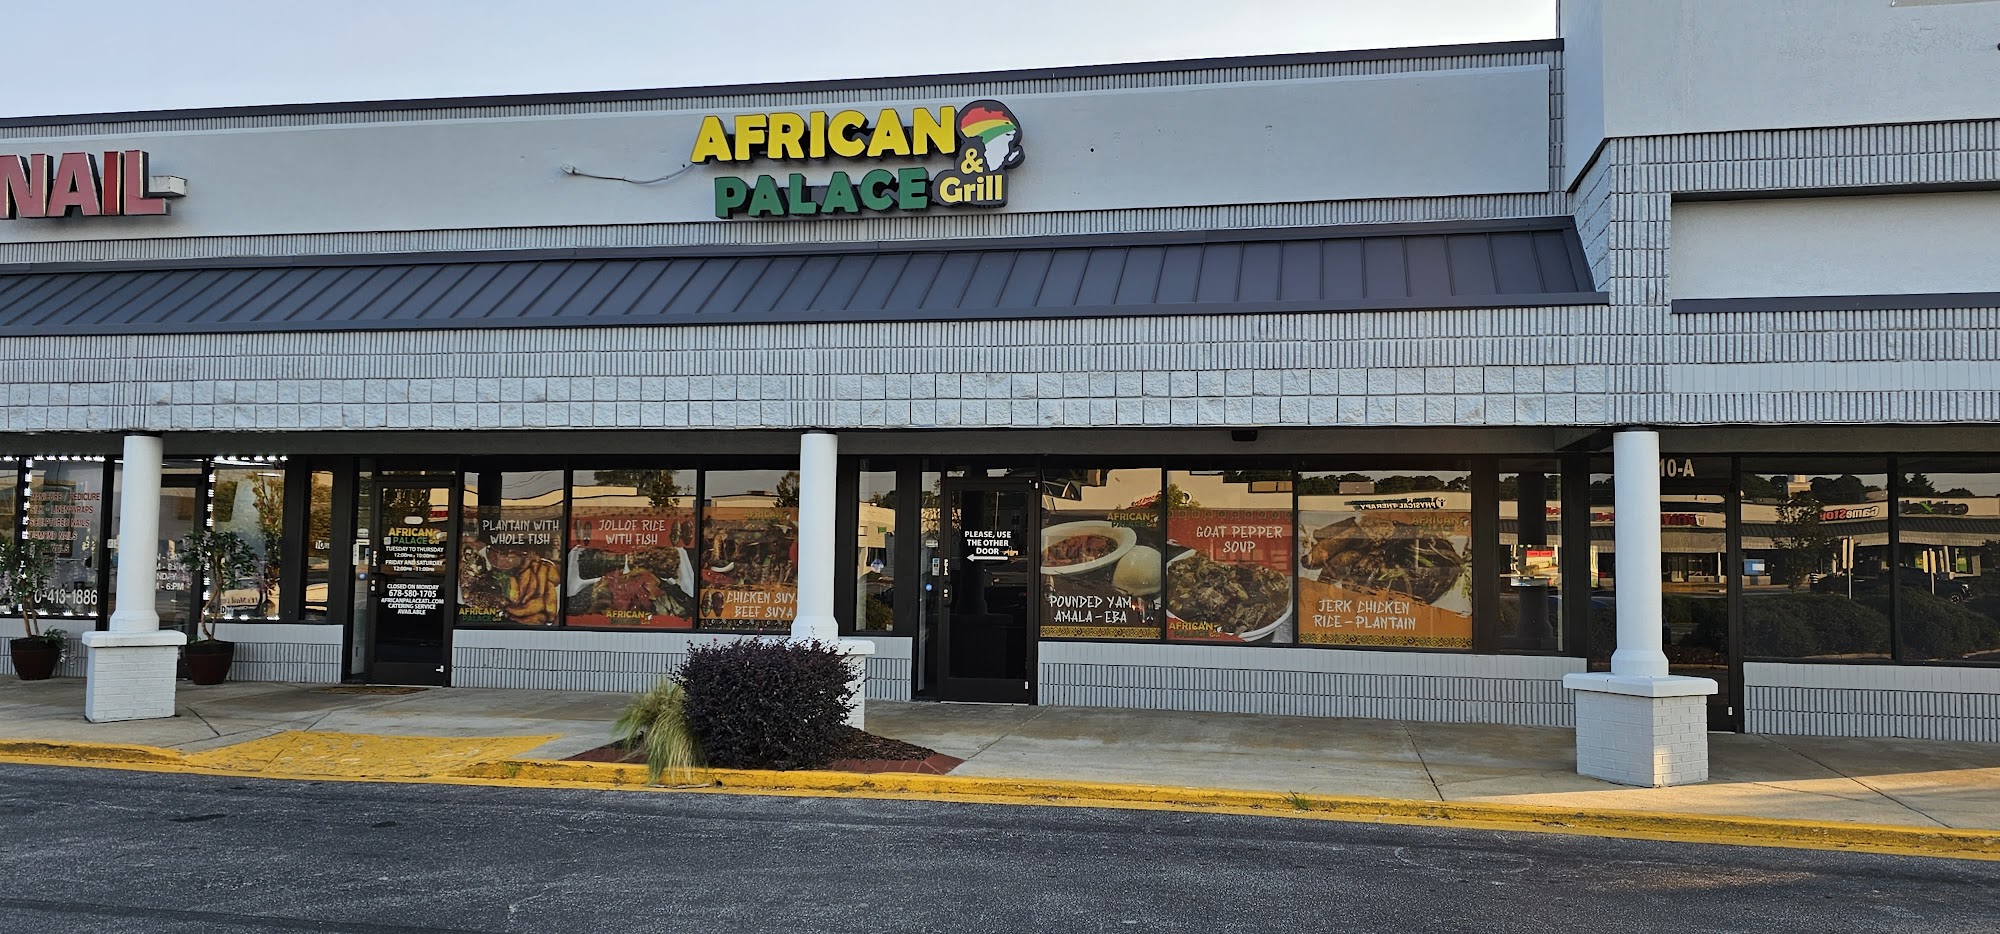 African Palace Bar And Grill